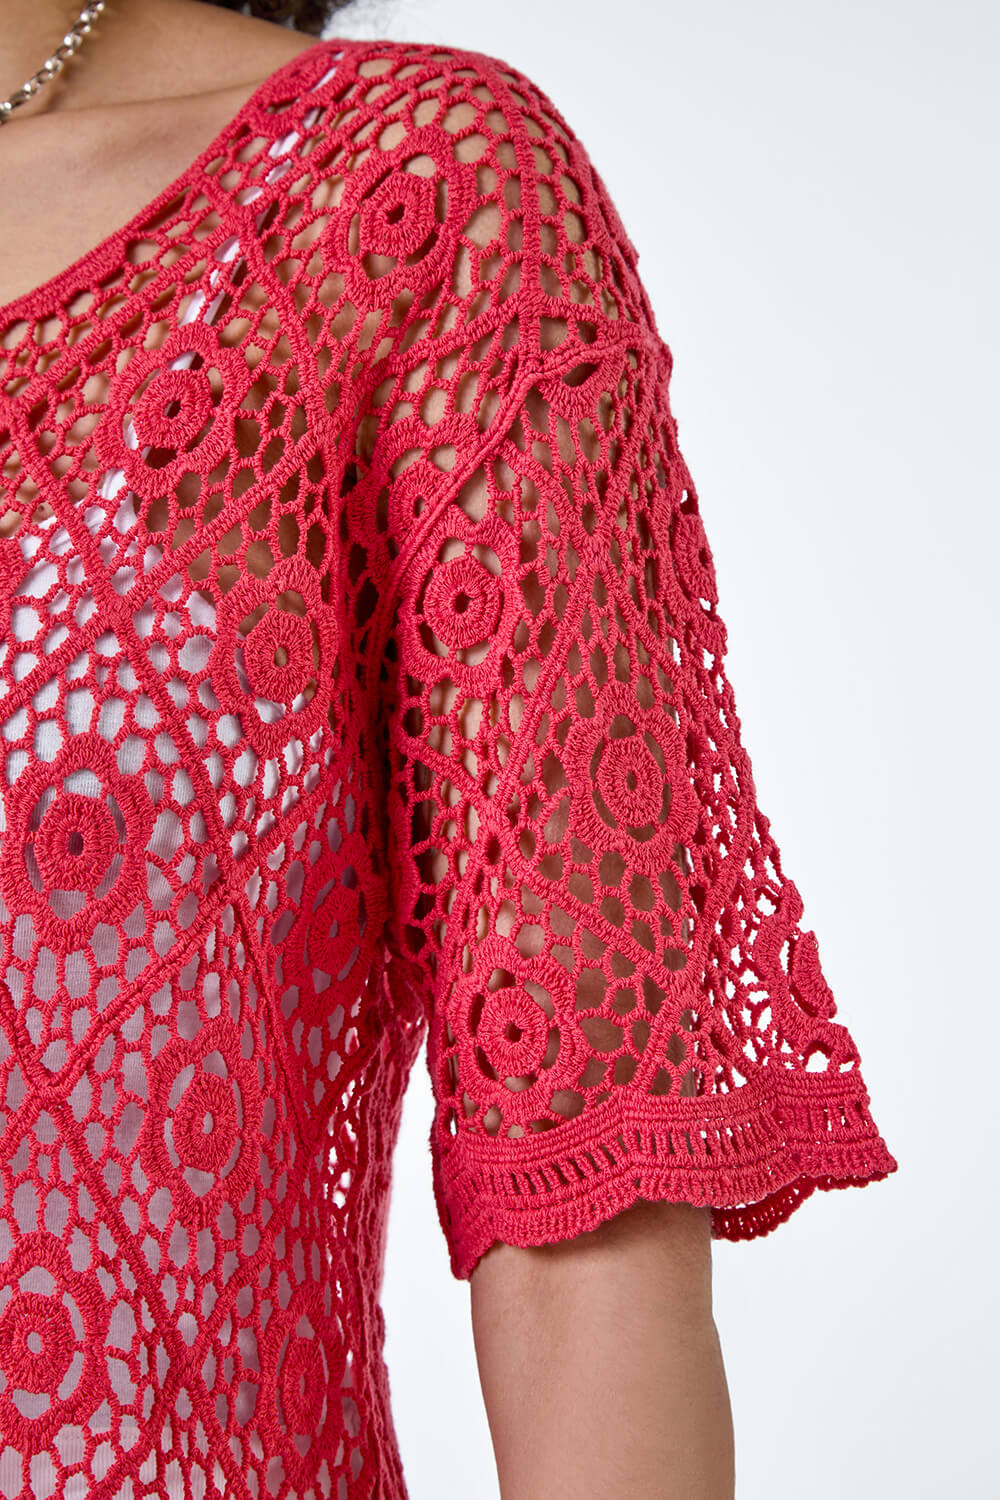 Red Cotton Crochet T-Shirt, Image 5 of 5